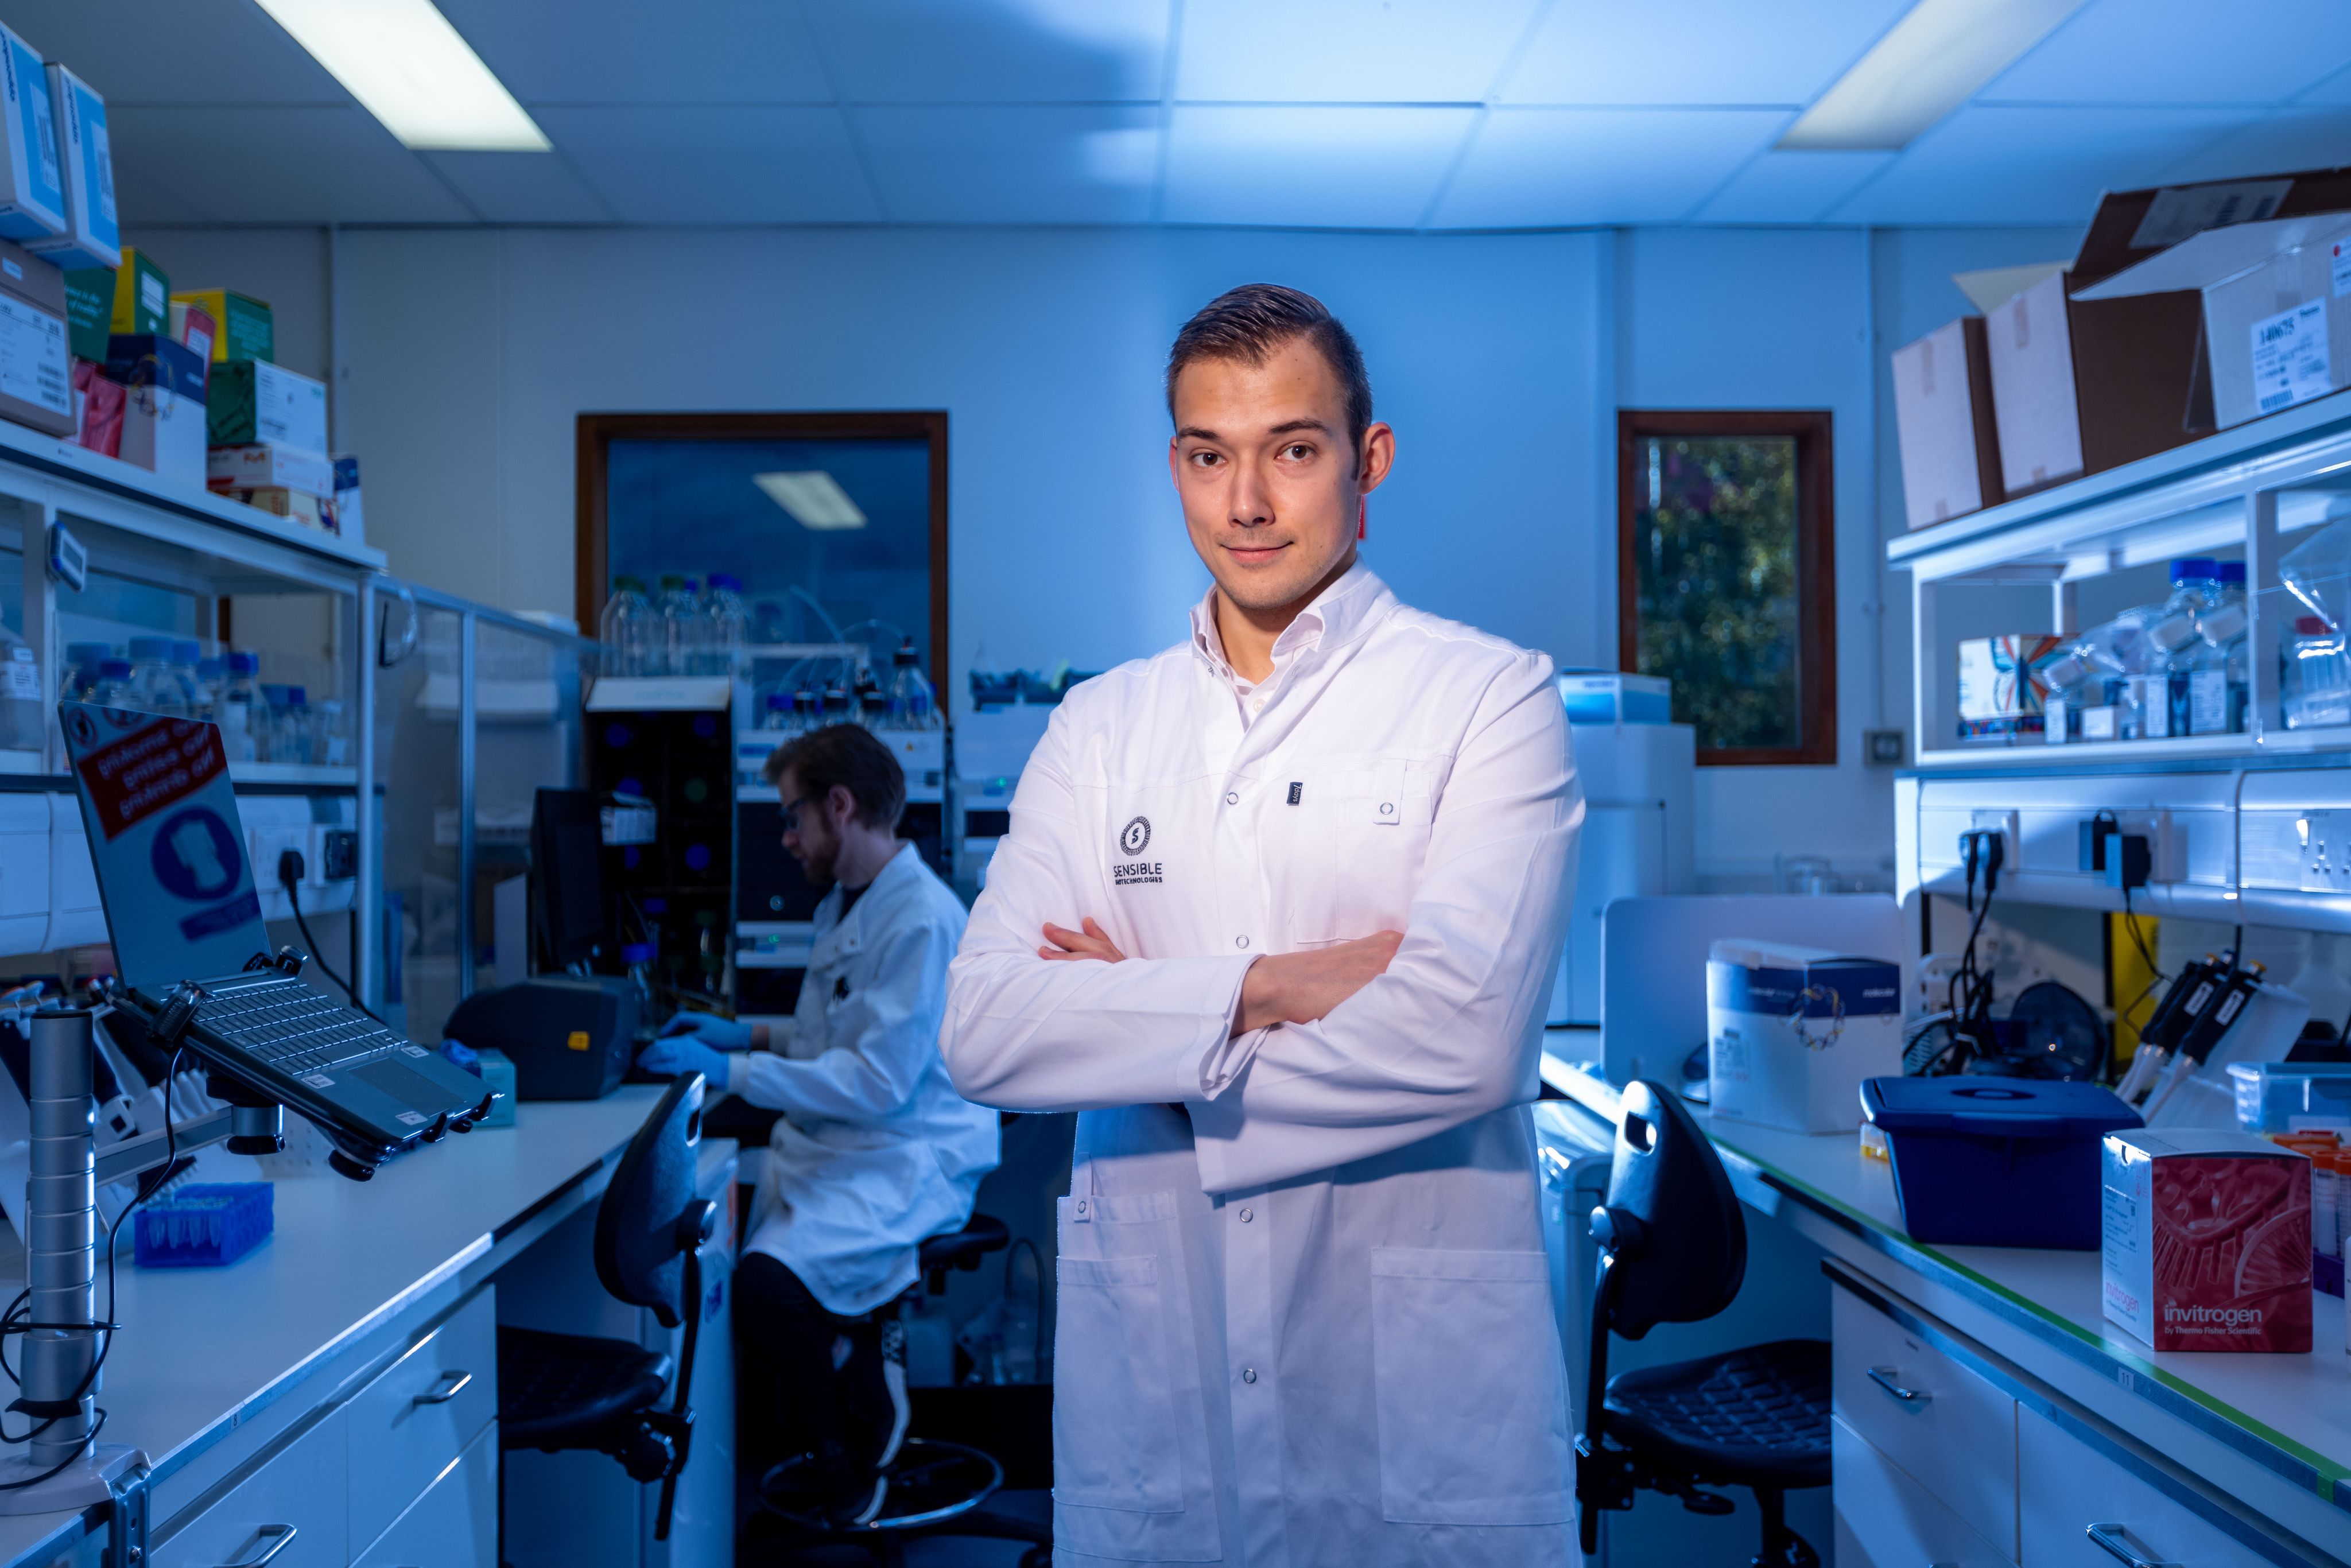 Miroslav standing with his arms crossed in his lab. He is wearing a white lab coat with his company name on it. The lab is illuminated with blue lighting and a colleague works in the background. 